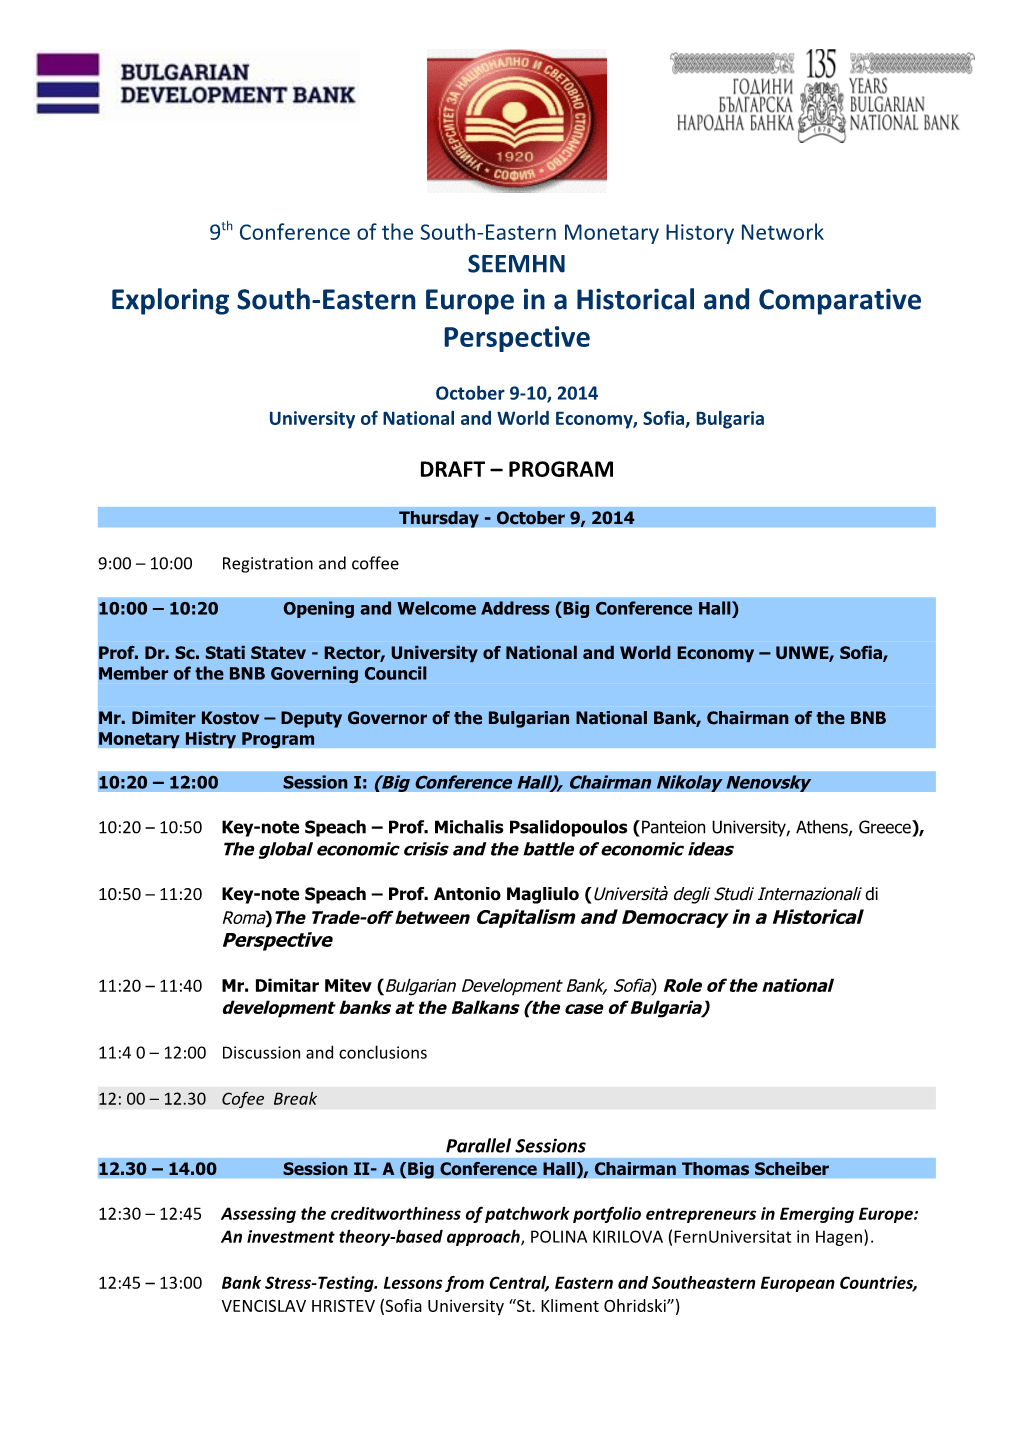 Exploring South-Eastern Europe in a Historical and Comparative Perspective